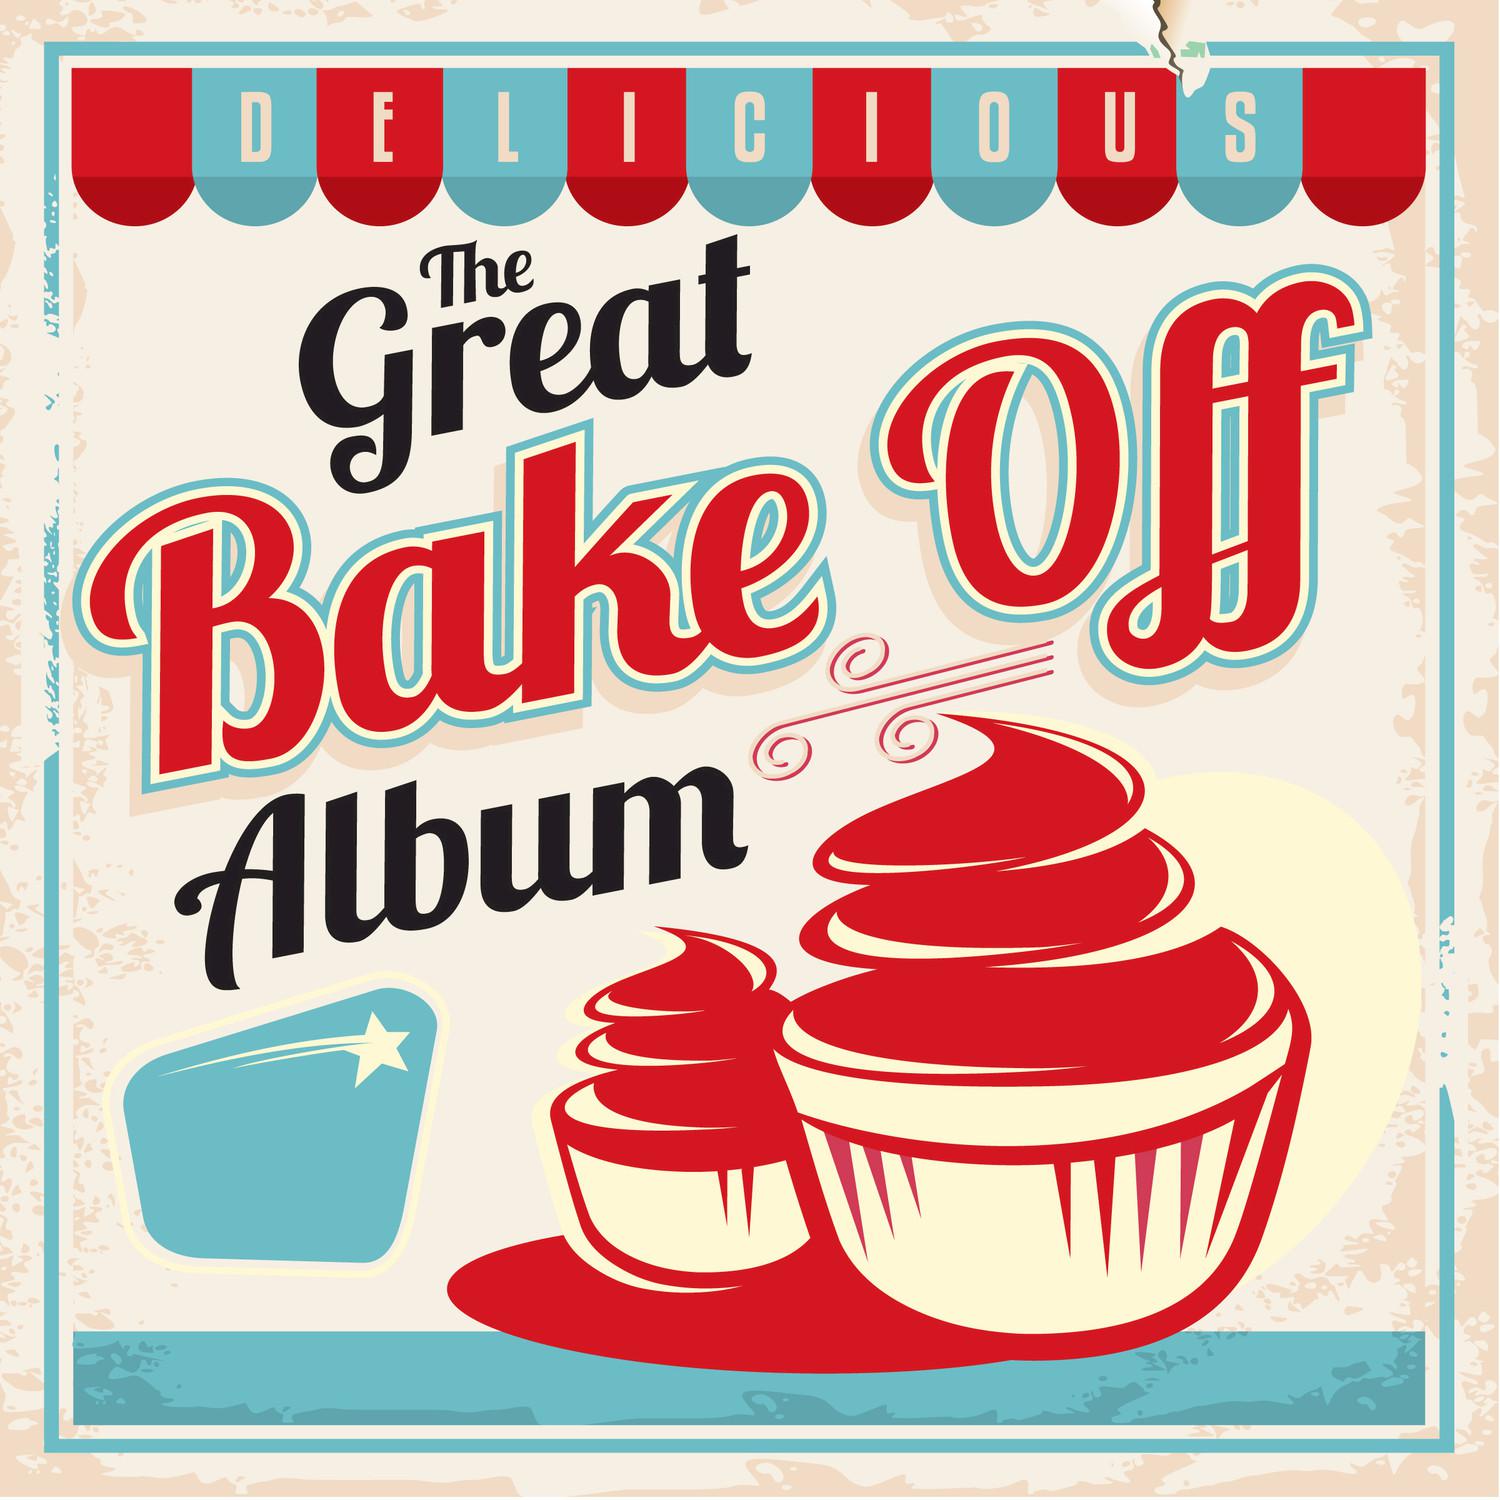 The Great Bake off Album